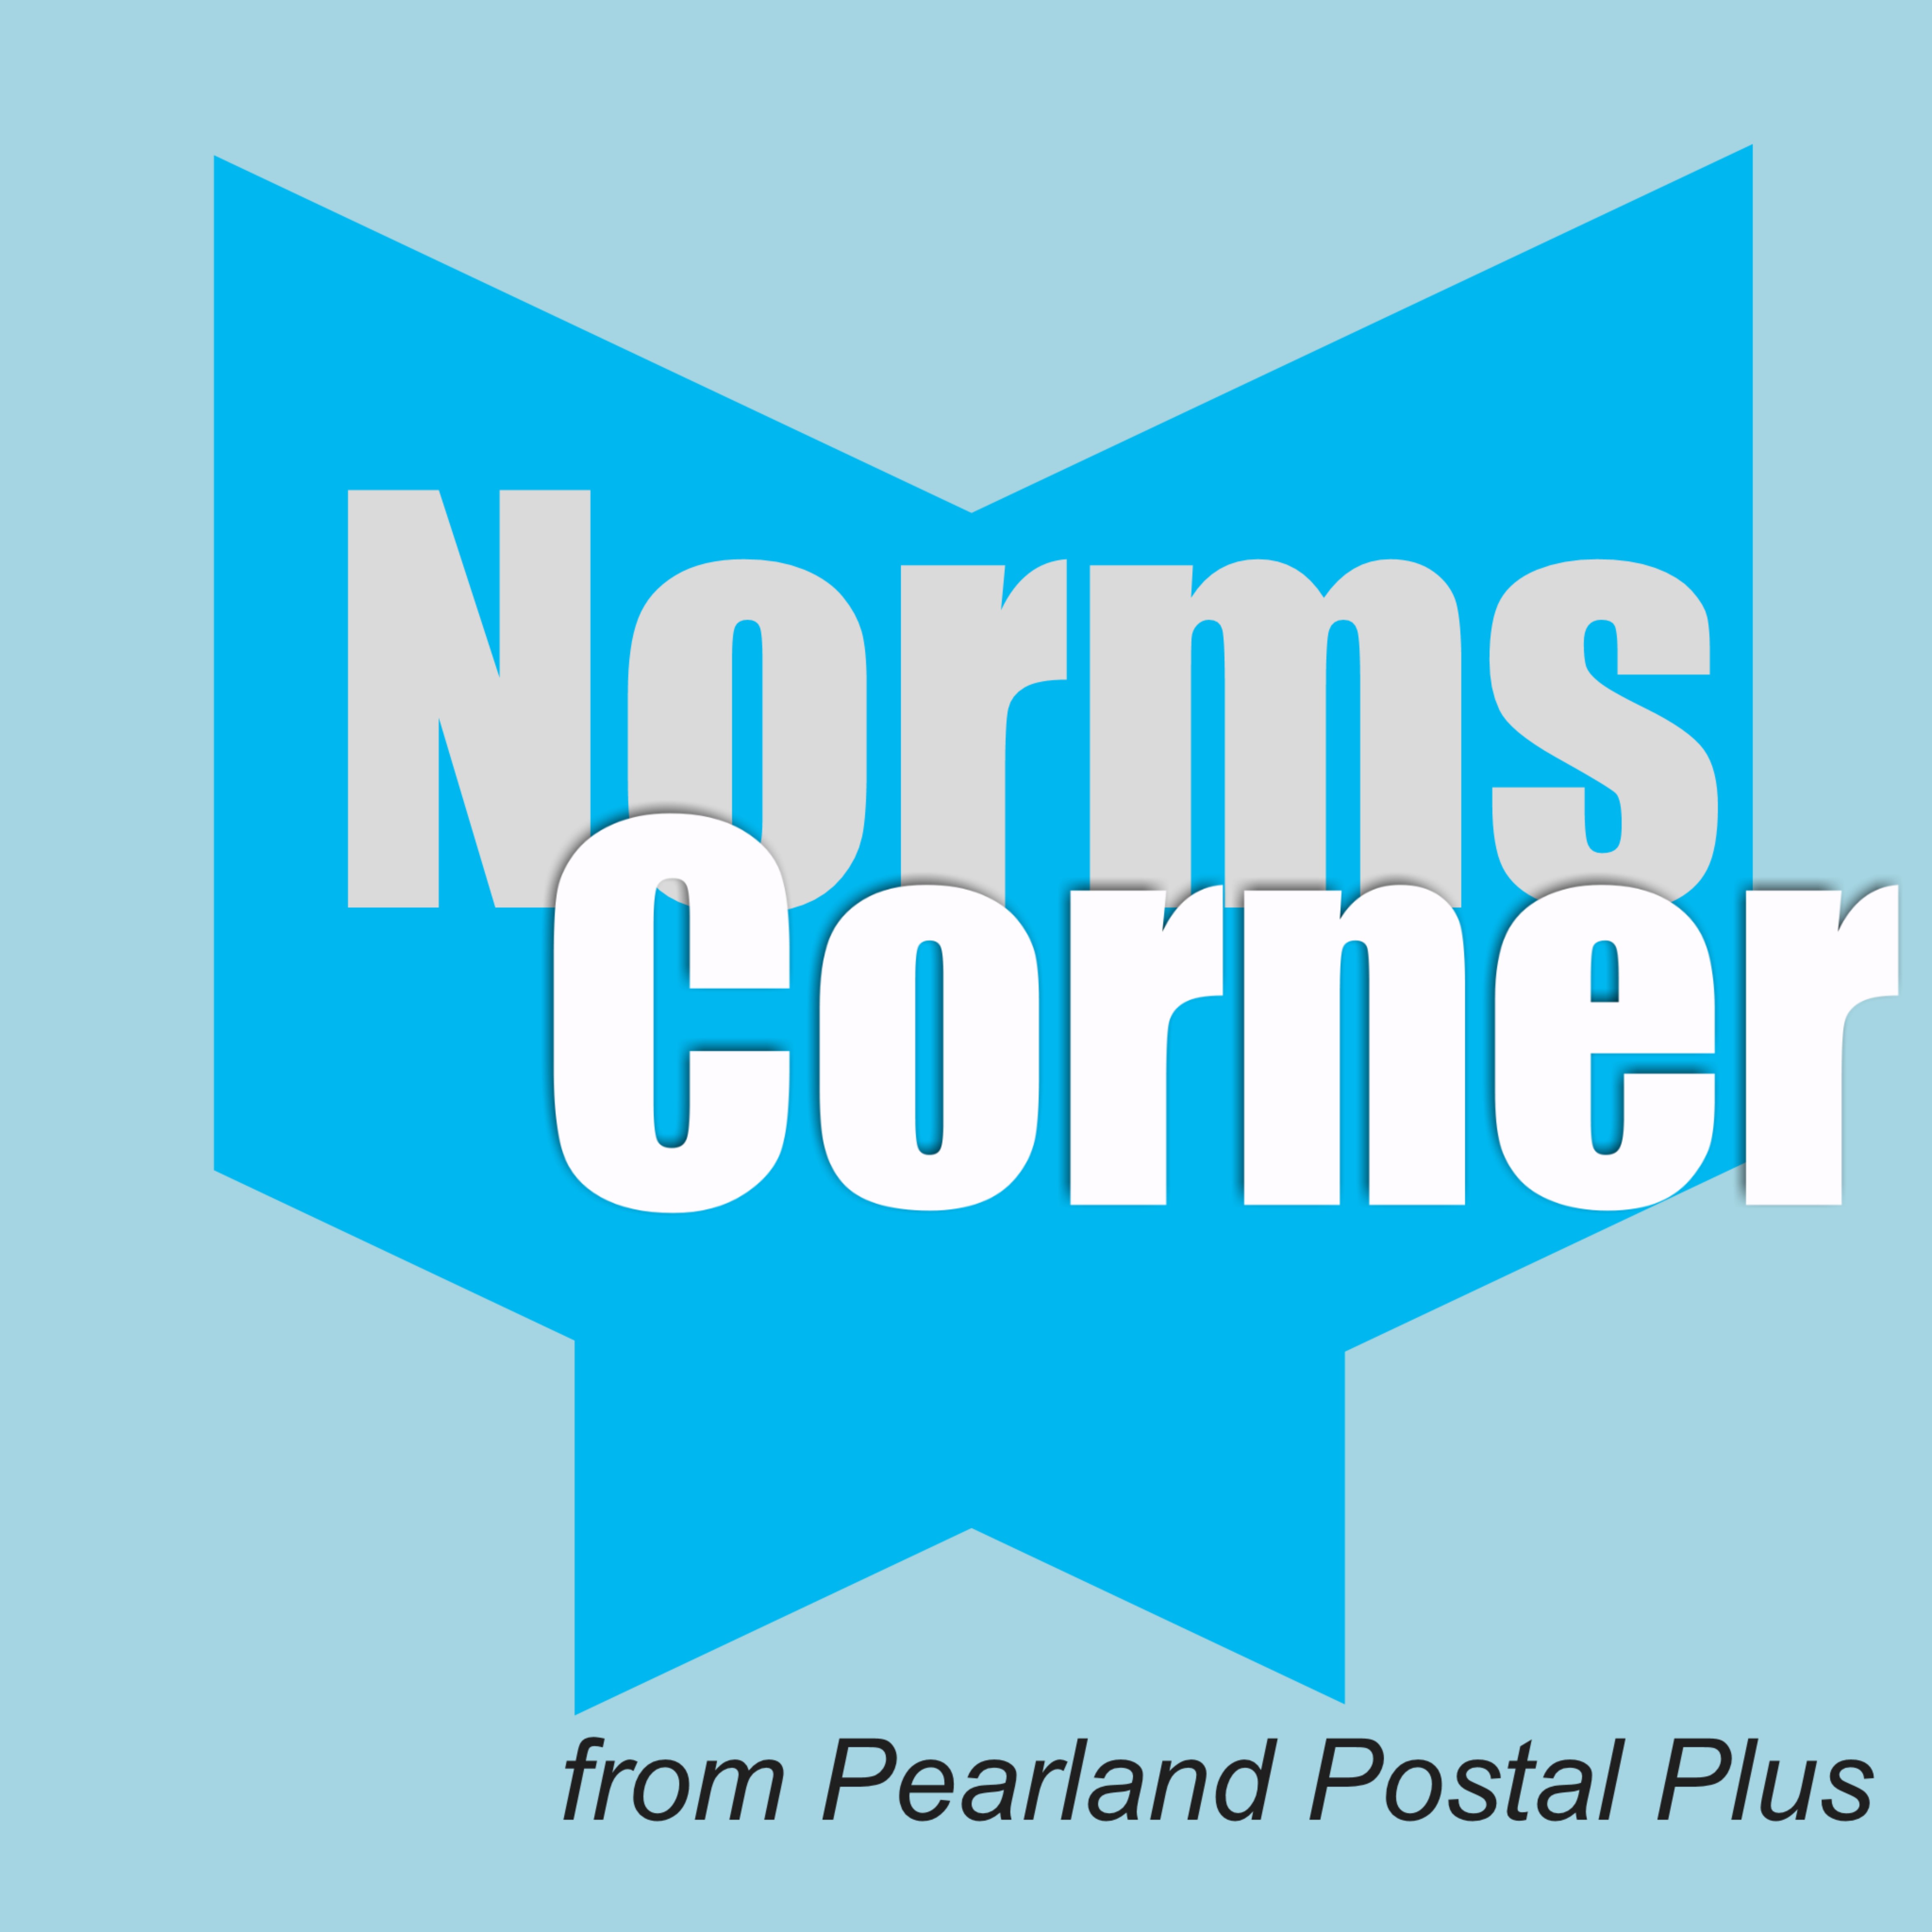 Pearland Postal Plus Norm's Blog